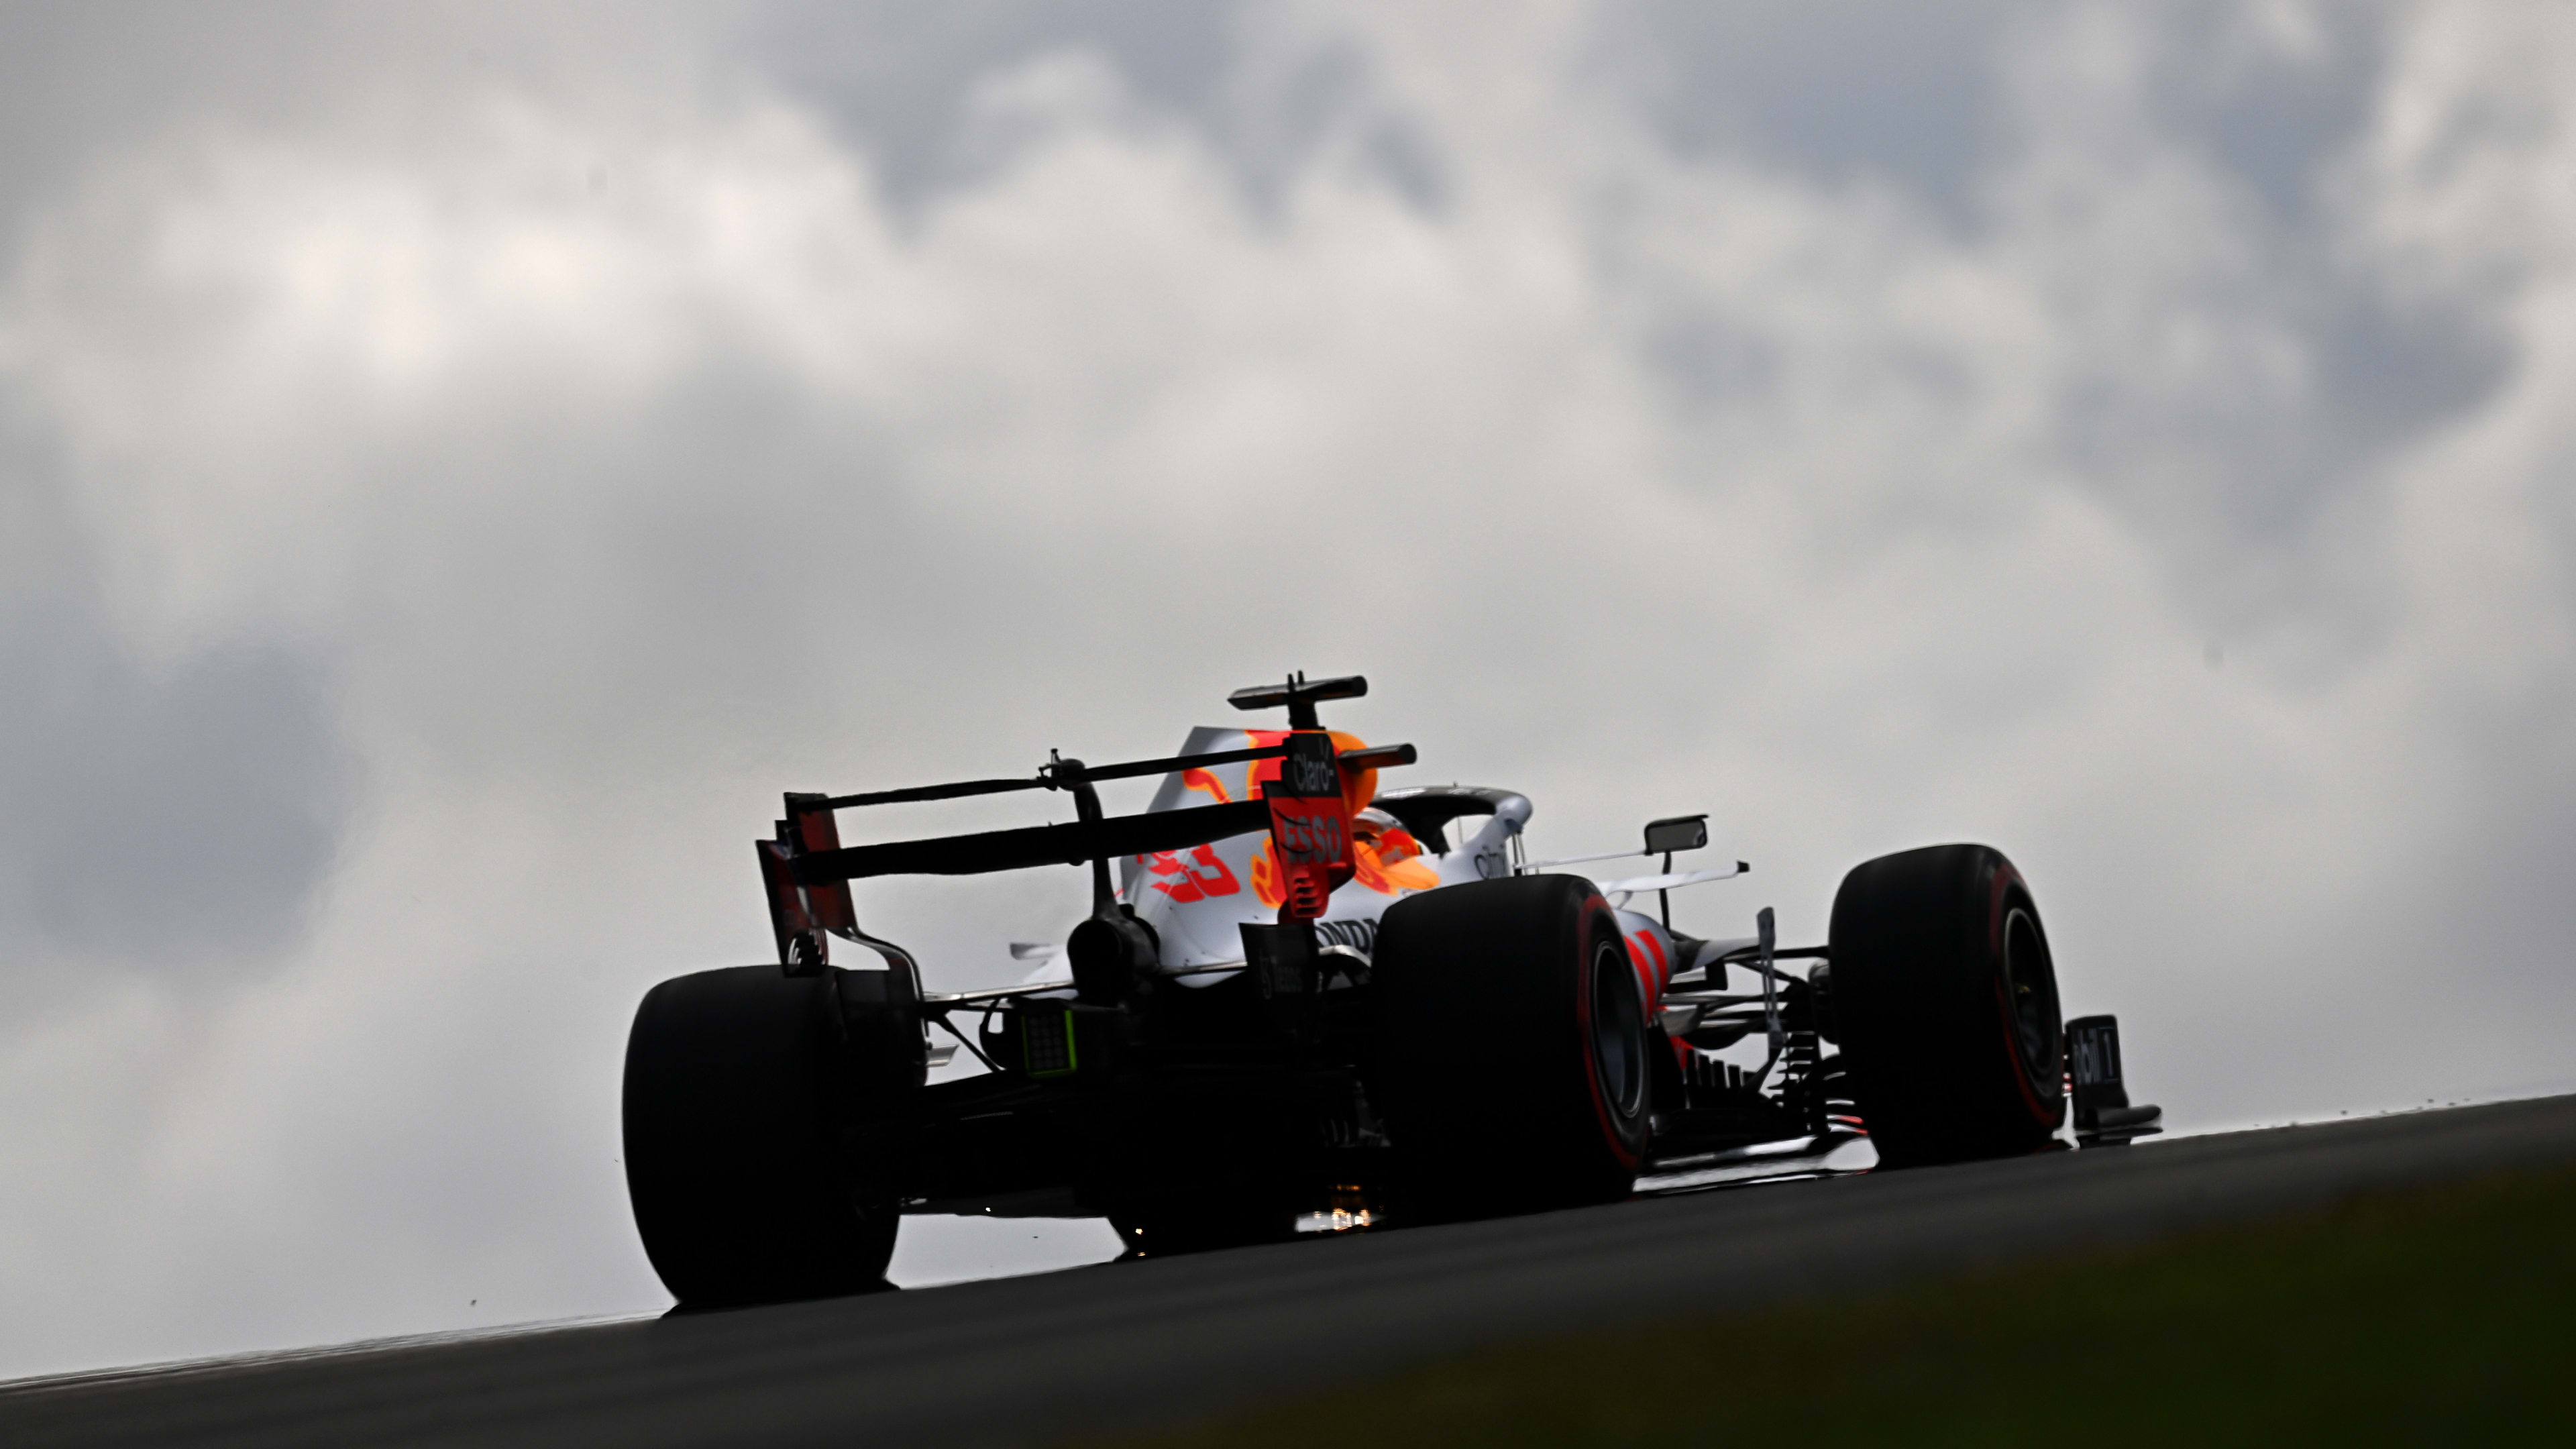 Fernando Alonso rues Aston Martin's 'terrible' FP1 as he predicts 'heavily  compromised' race following shock Q1 exit